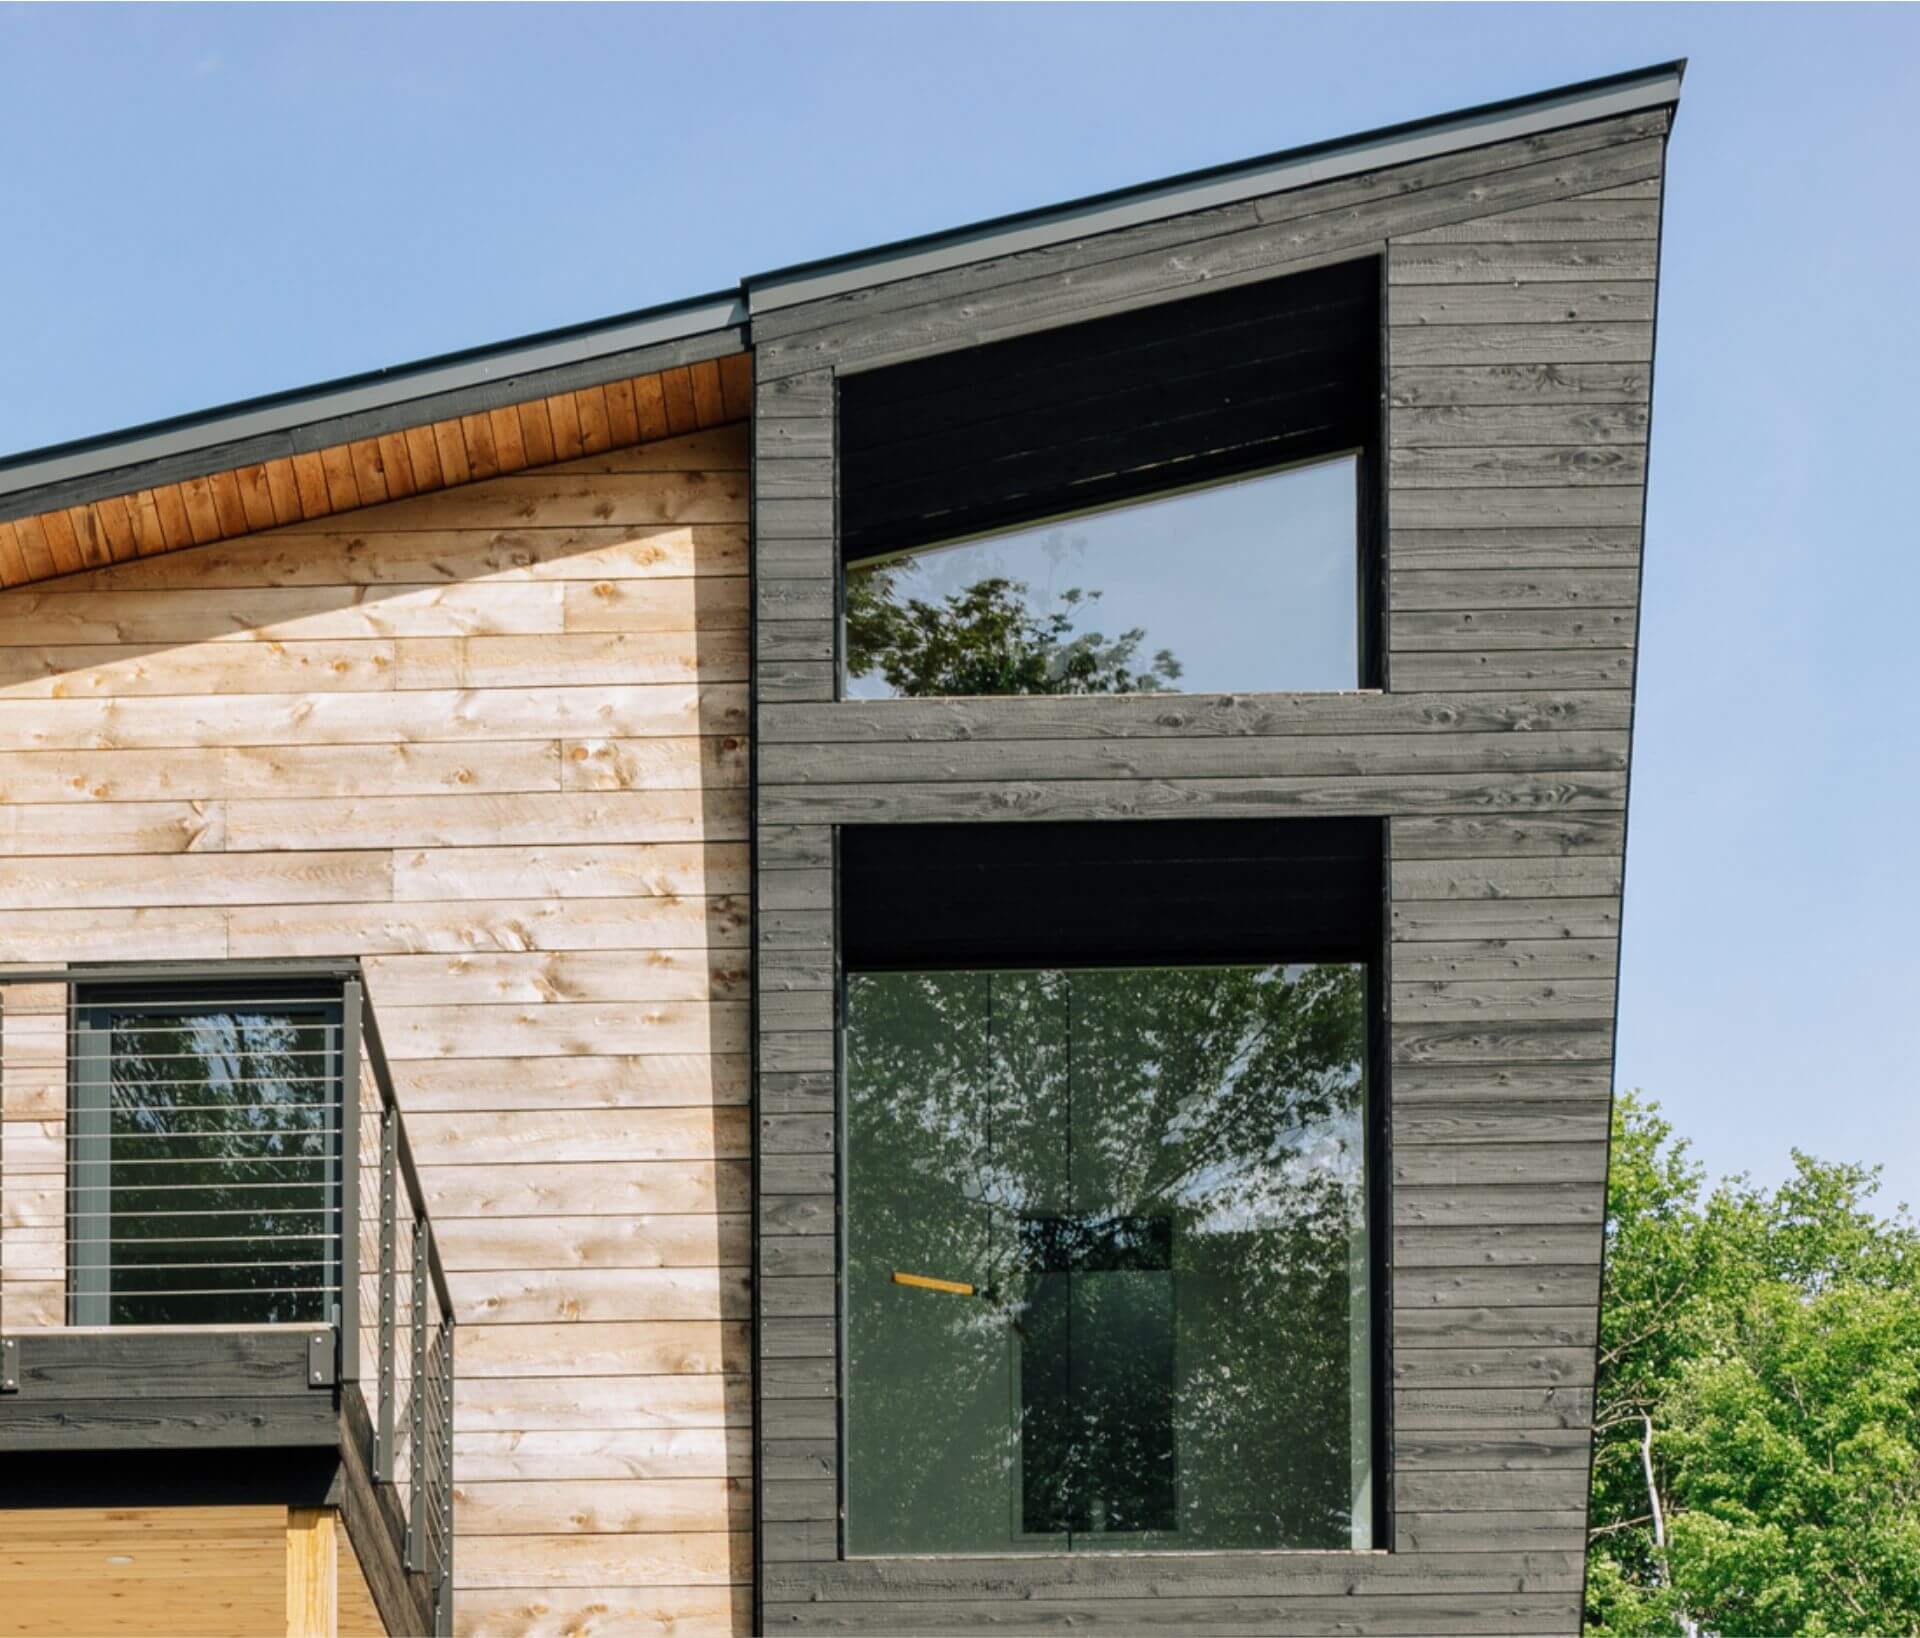 The Catskill Project house exterior